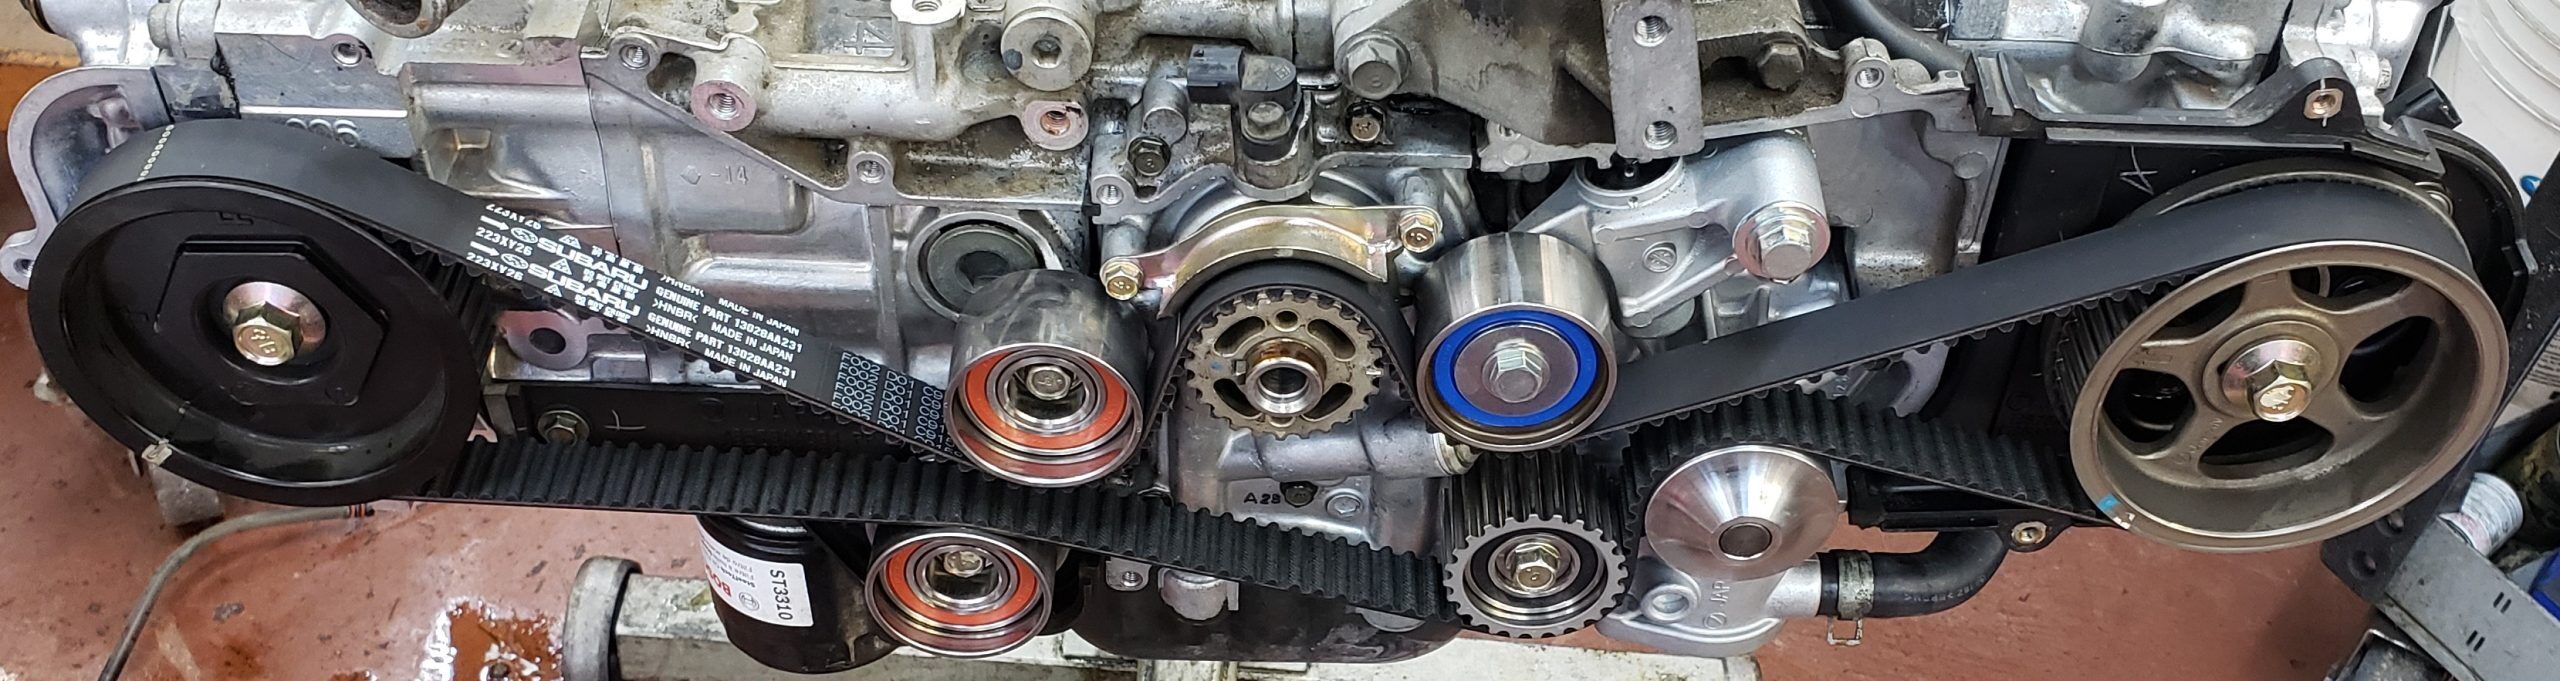 Subaru engine being repaired on an engine stand